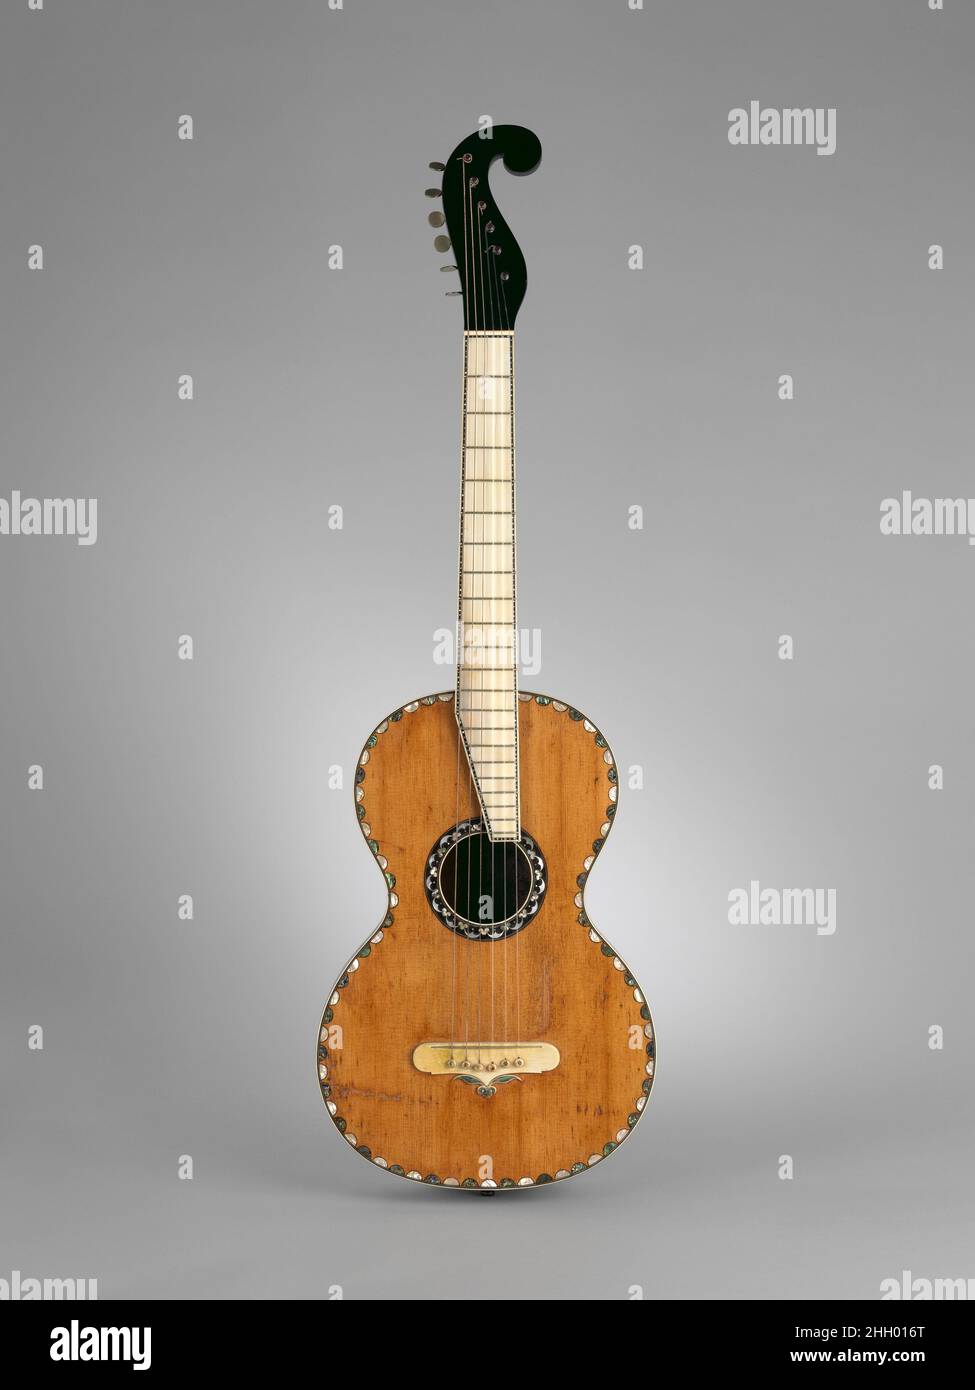 bunker Appropriate Assume Guitar ca. 1837 Christian Frederick Martin The guitar builder C. F. Martin  established a workshop in New York City in 1833 upon emigrating from  Markneukirchen, Germany. He later moved his company to